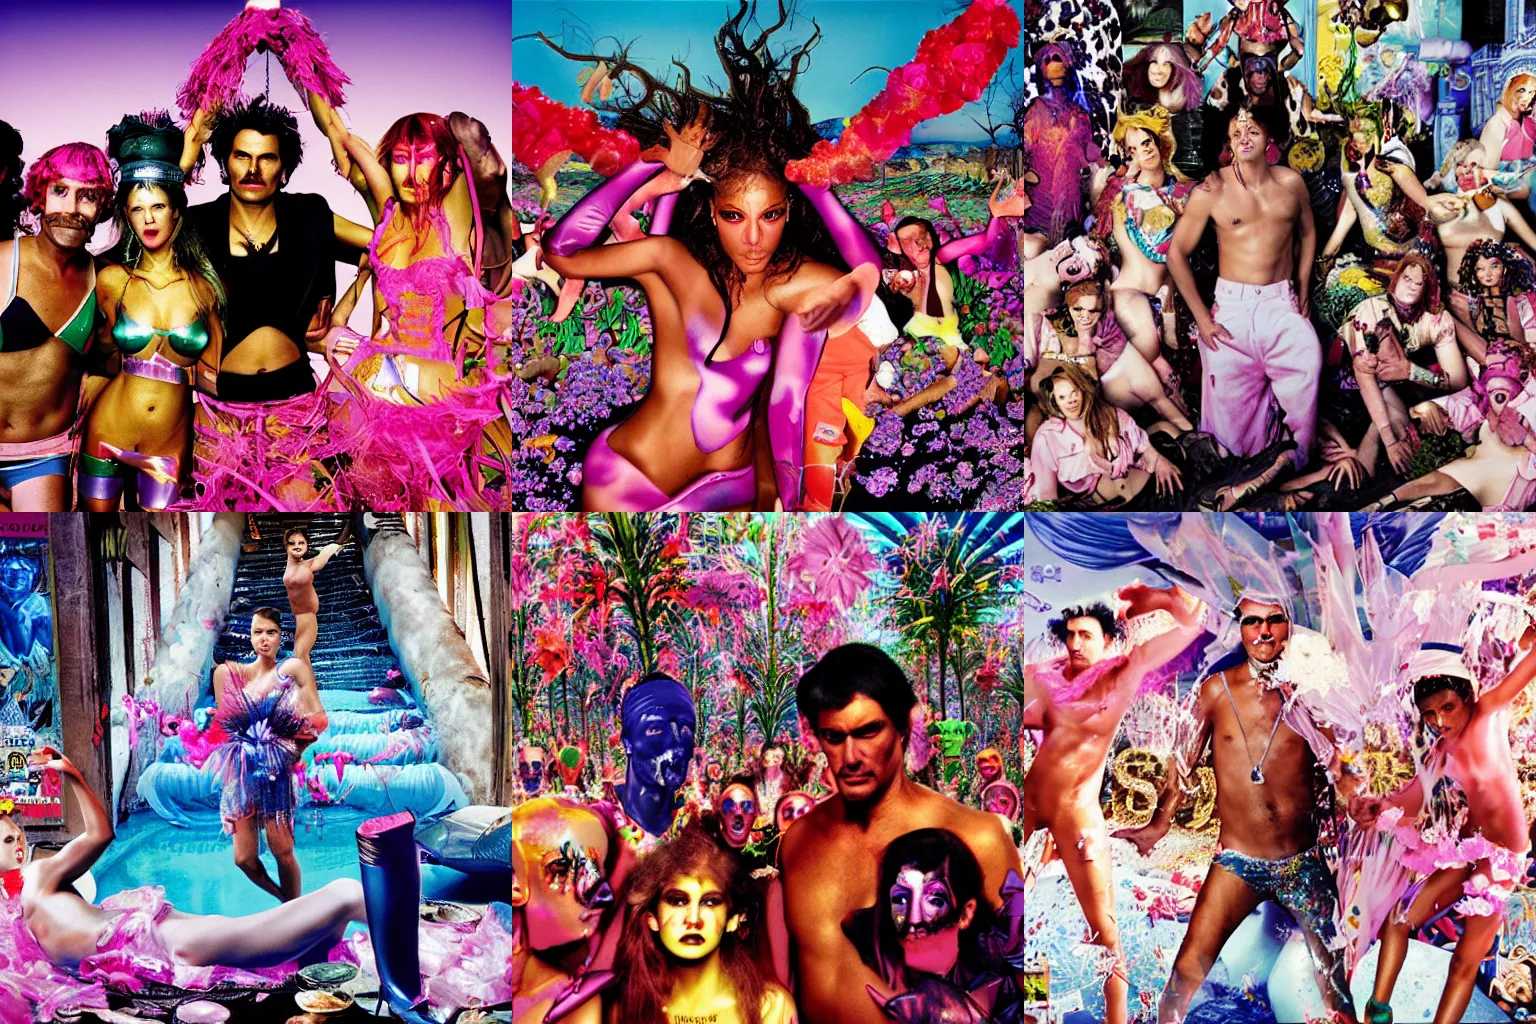 Prompt: a photograph by David LaChapelle